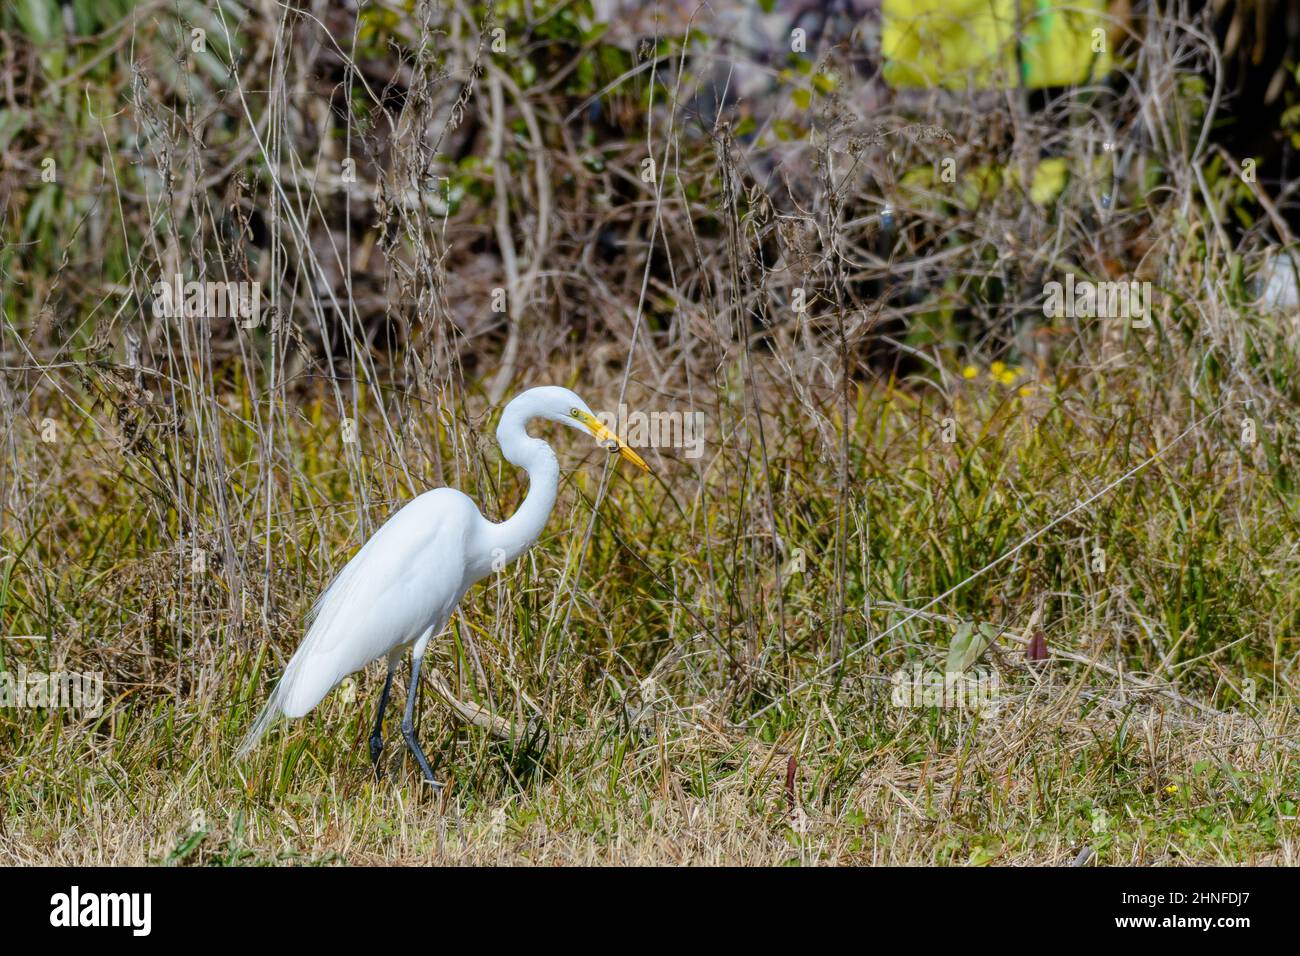 Great egret with a lizard in its mouth in grassy area of New Orleans City Park Stock Photo